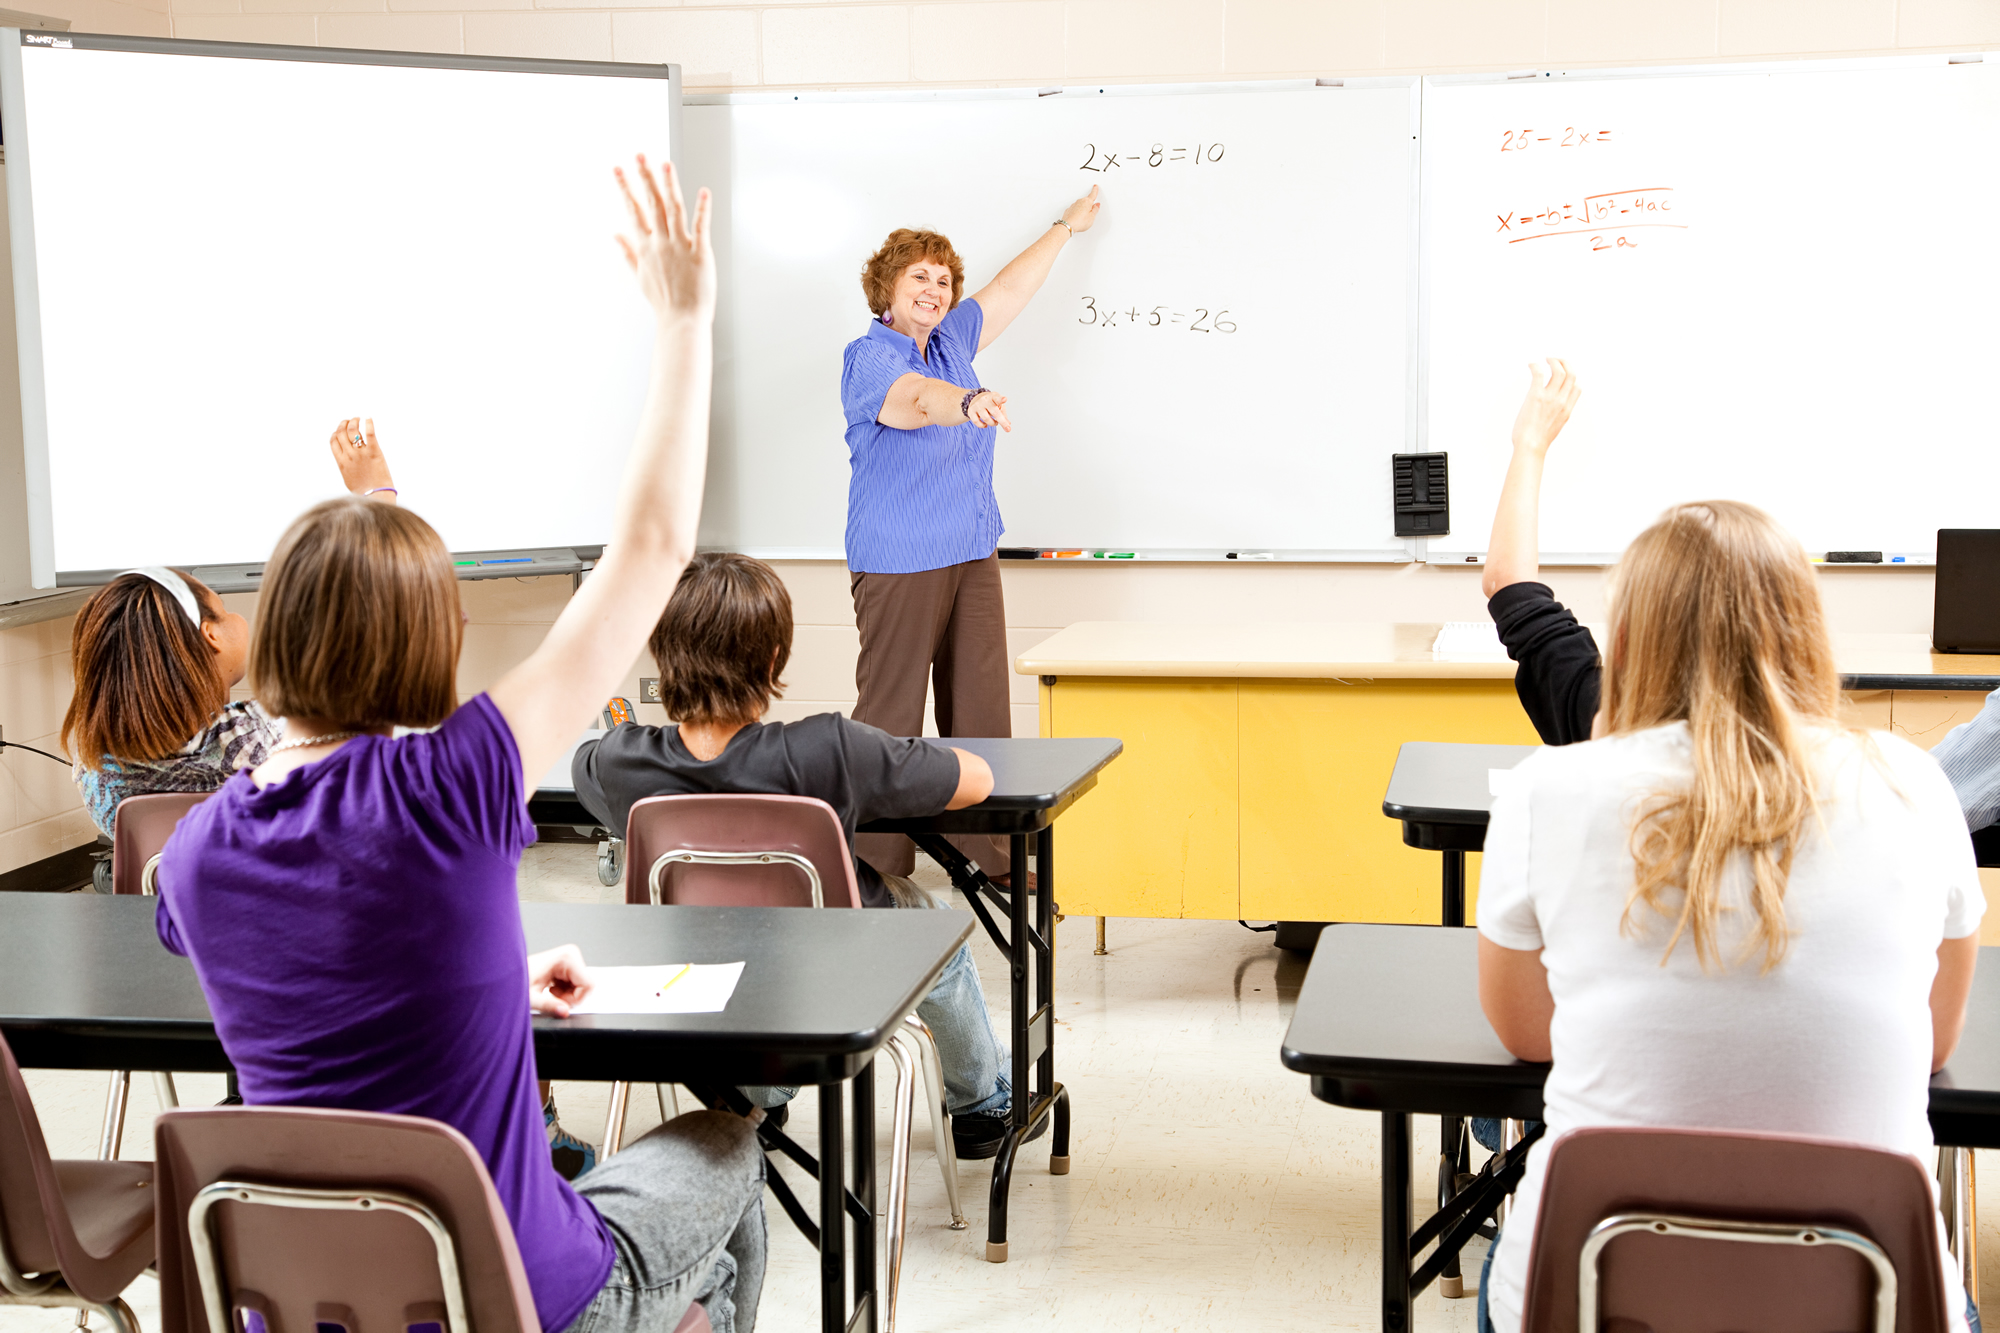 14 classroom management strategies to increase student learning